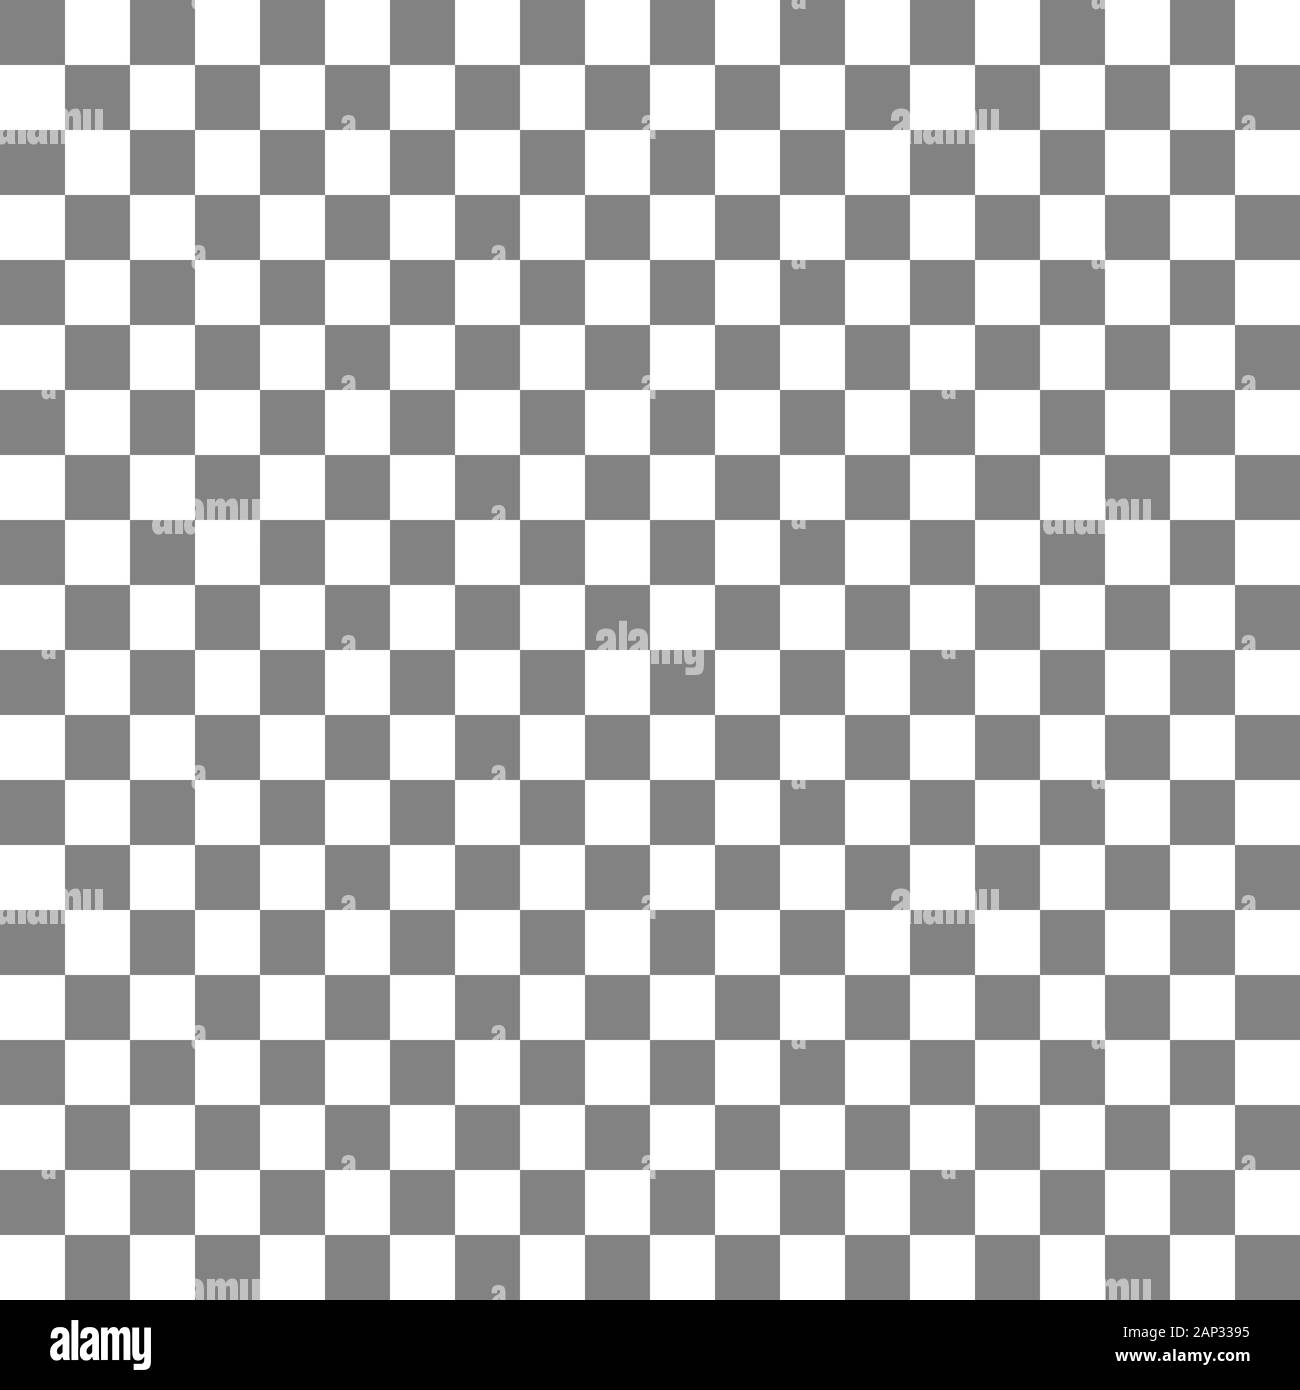 Gray and white chess board. Seamless pattern with gray and white squares. Vector illustration Stock Vector